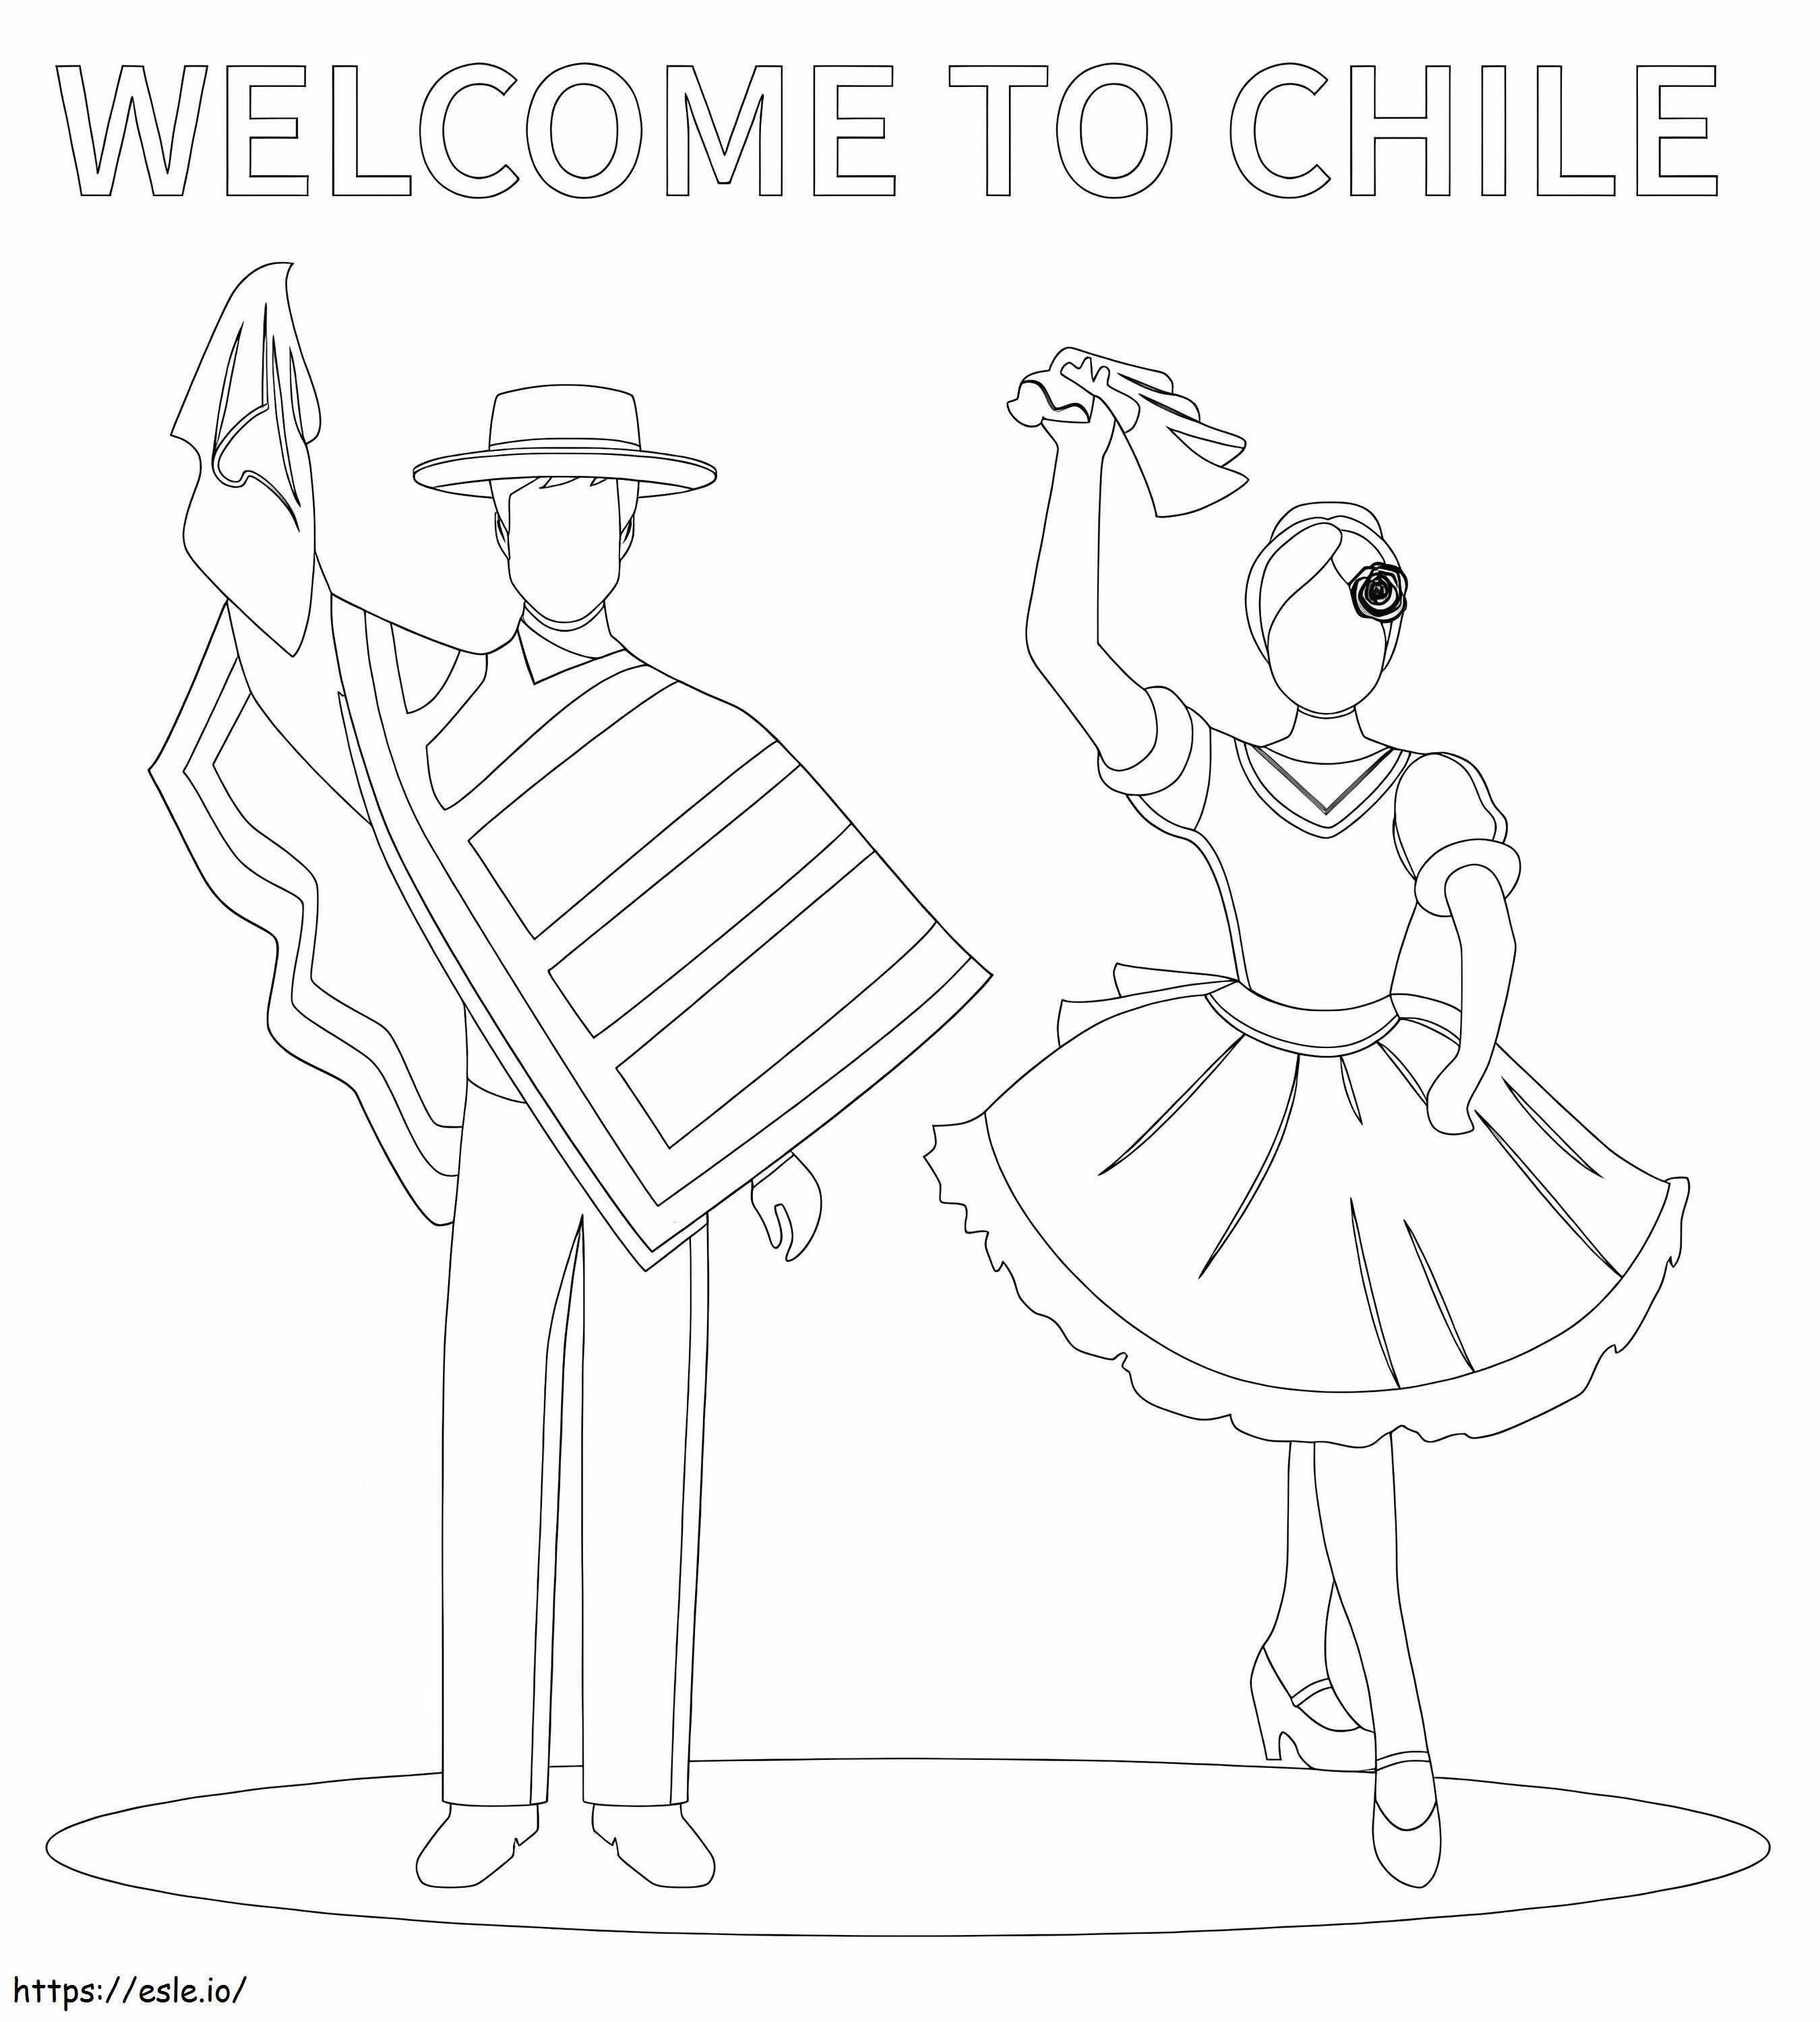 Welcome To Chile coloring page